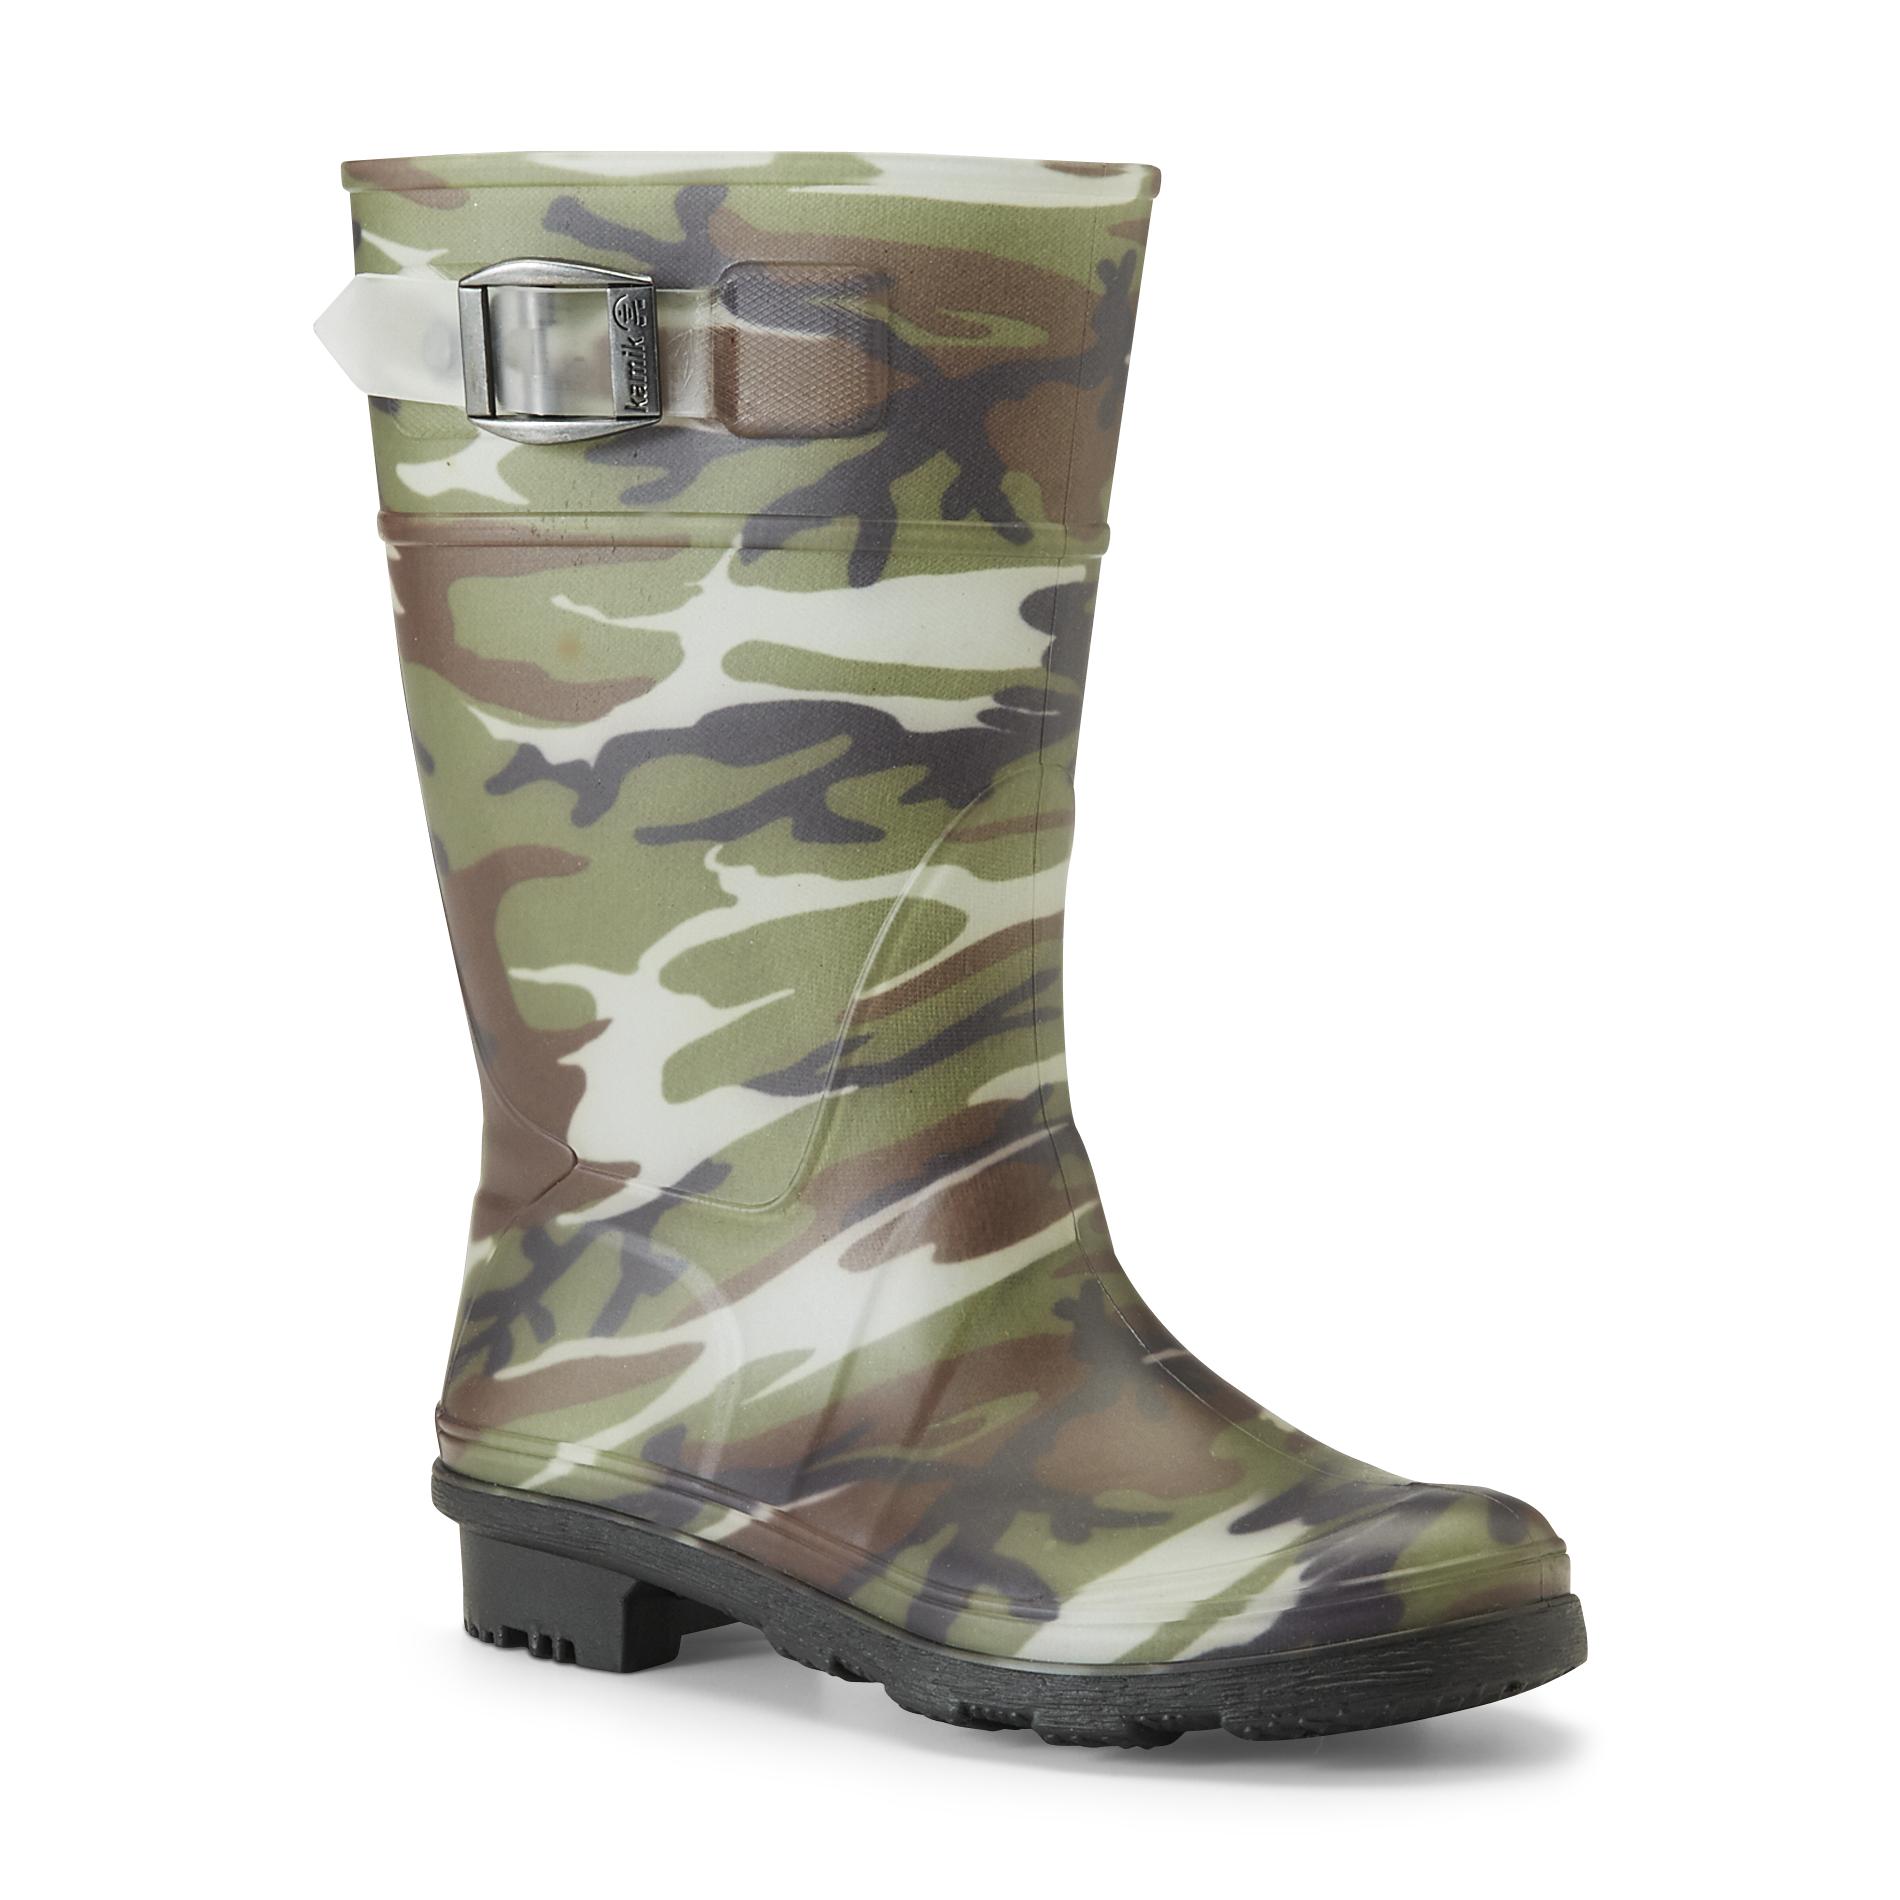 Kamik Boy's 9" Squad Jr Green/Camouflage Water-Resistant Pull-On Rain Boot